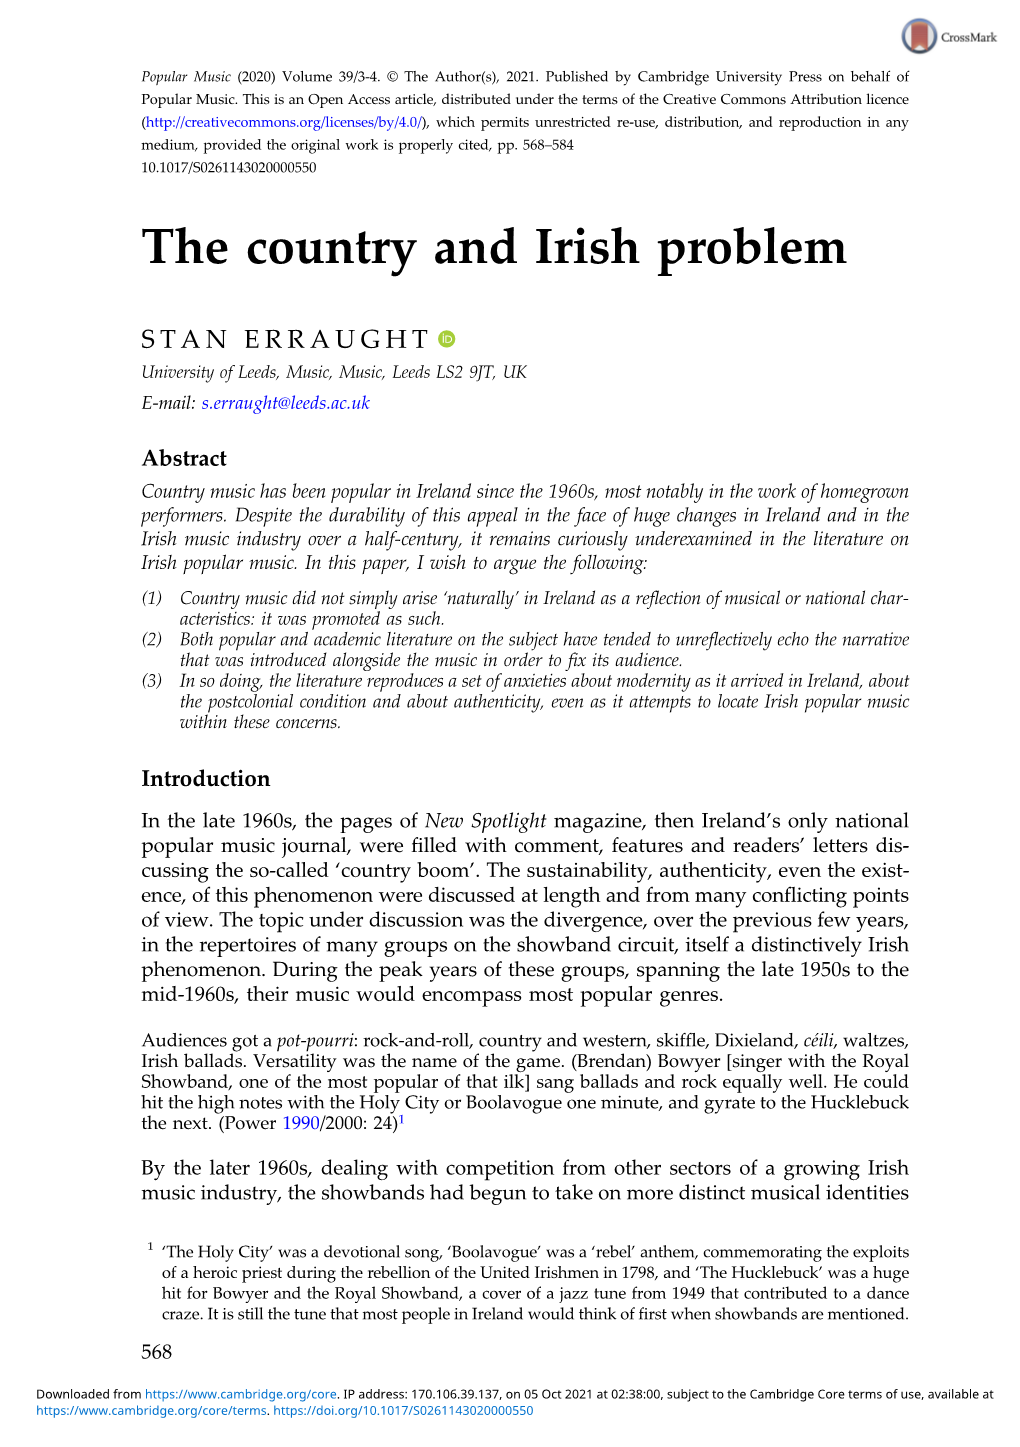 The Country and Irish Problem